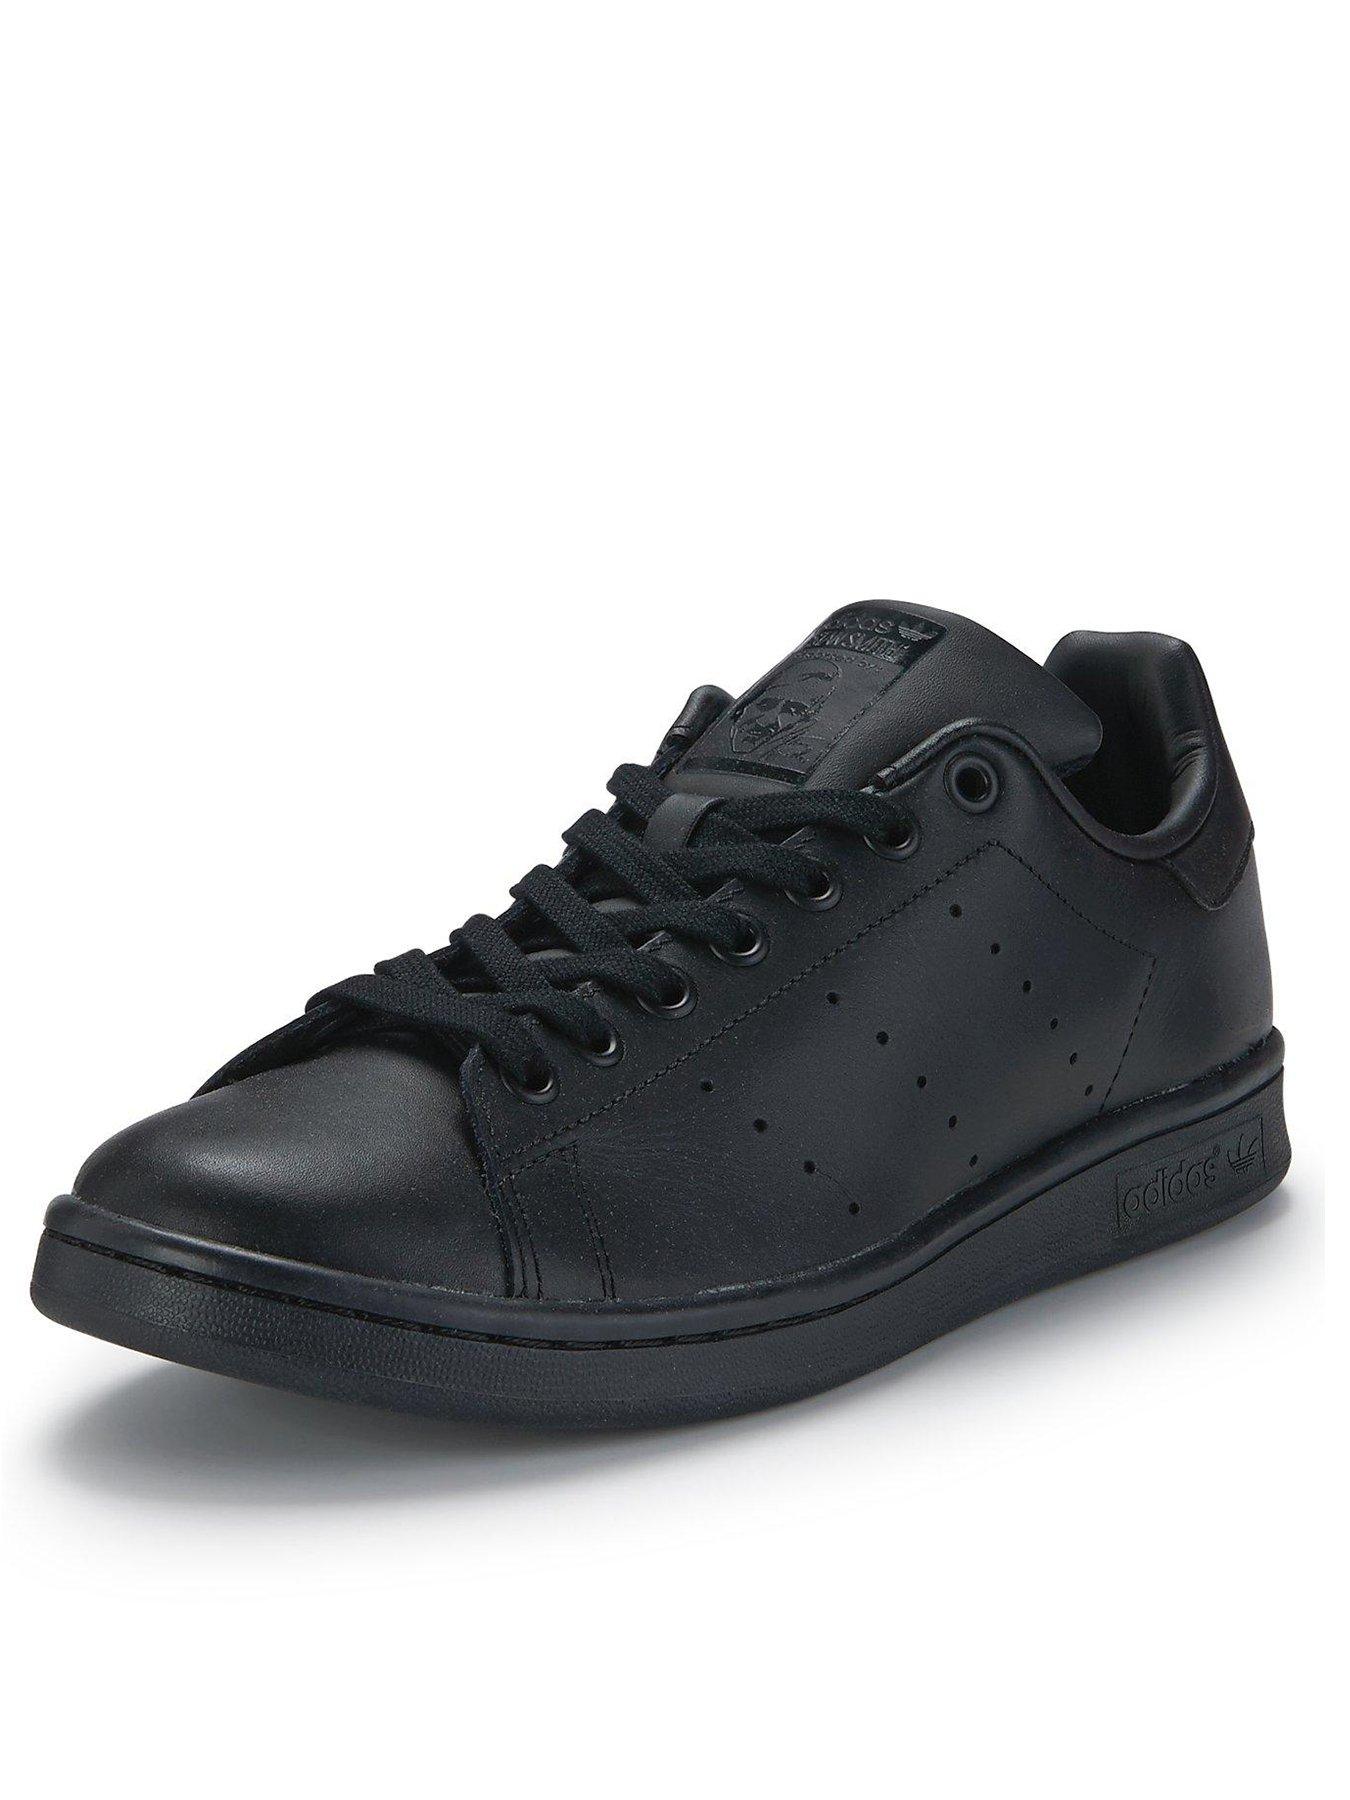 stan smith trainers mens